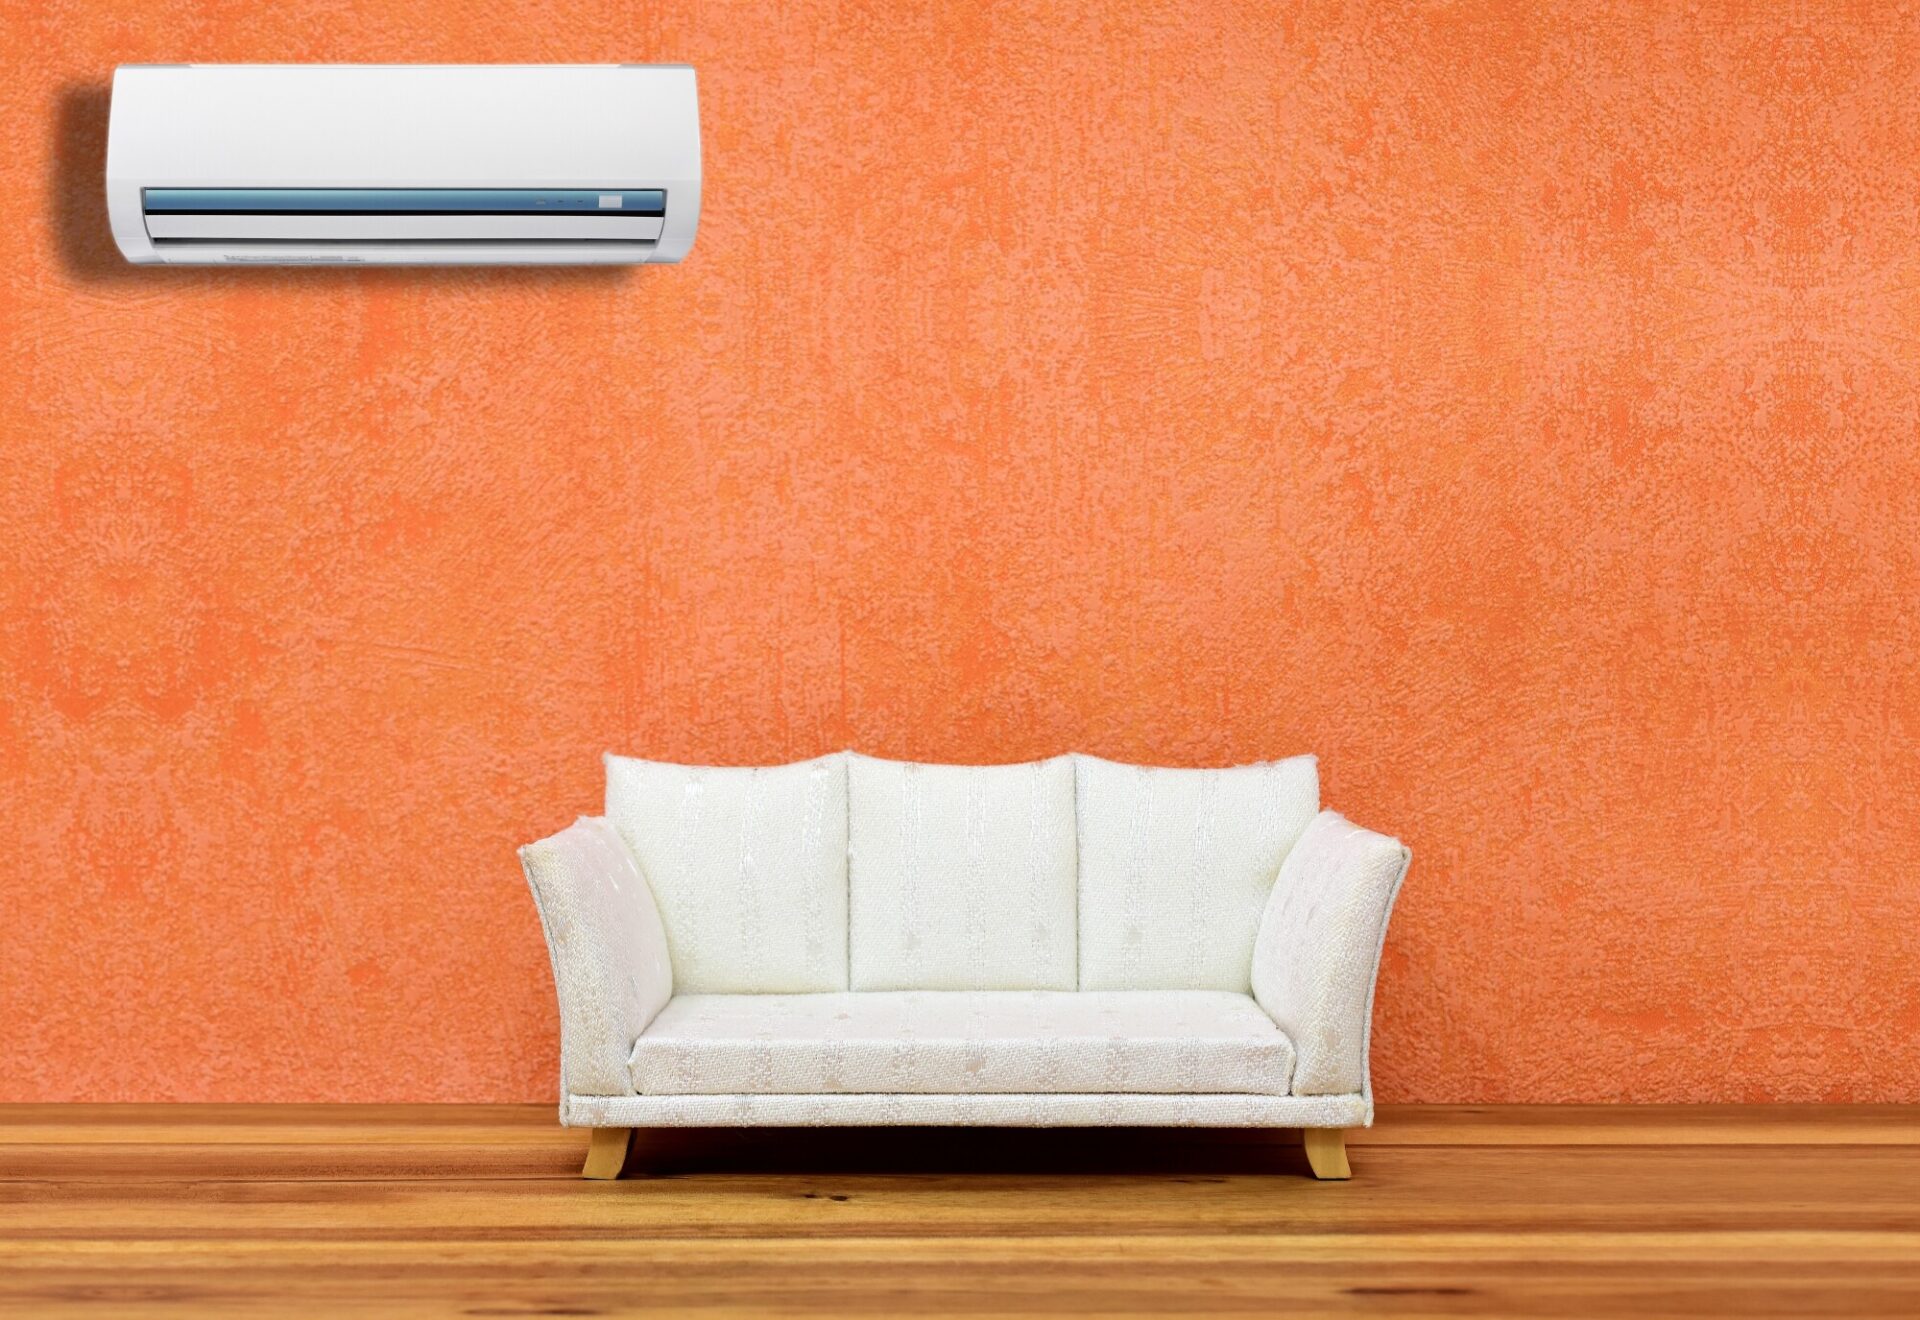 Top 5 Benefits of Hiring AC Repair Services for Homeowners